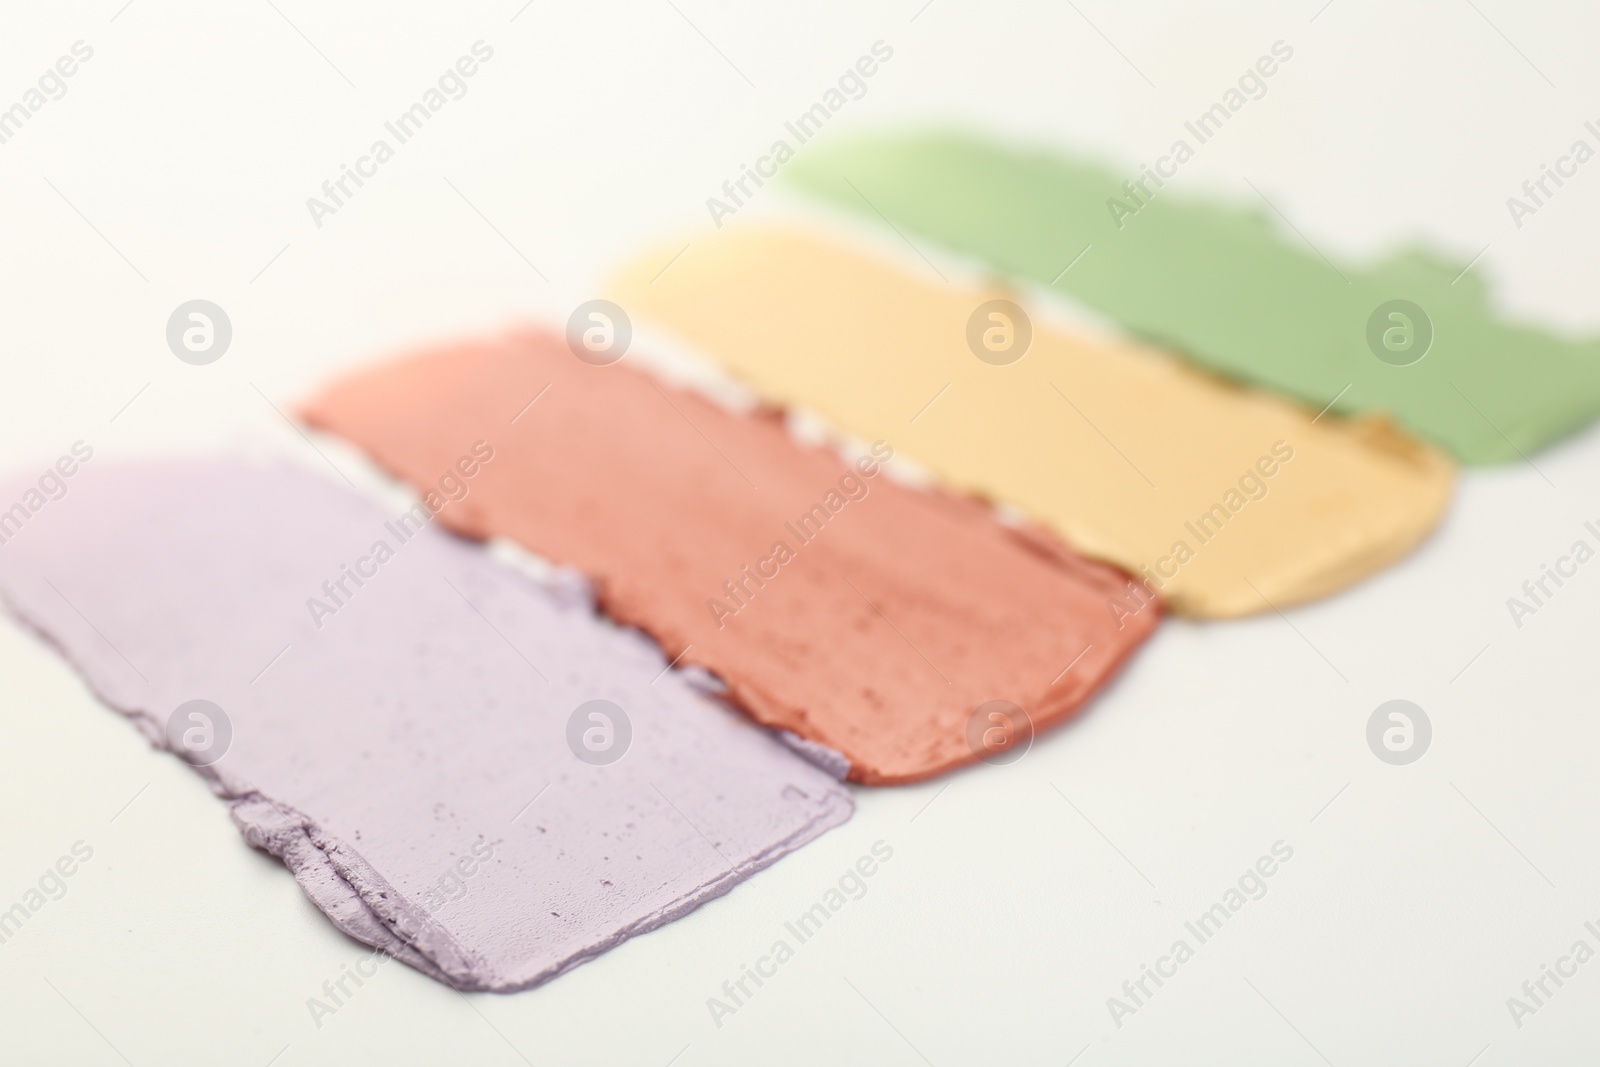 Photo of Samples of different color correcting concealers on white background, closeup